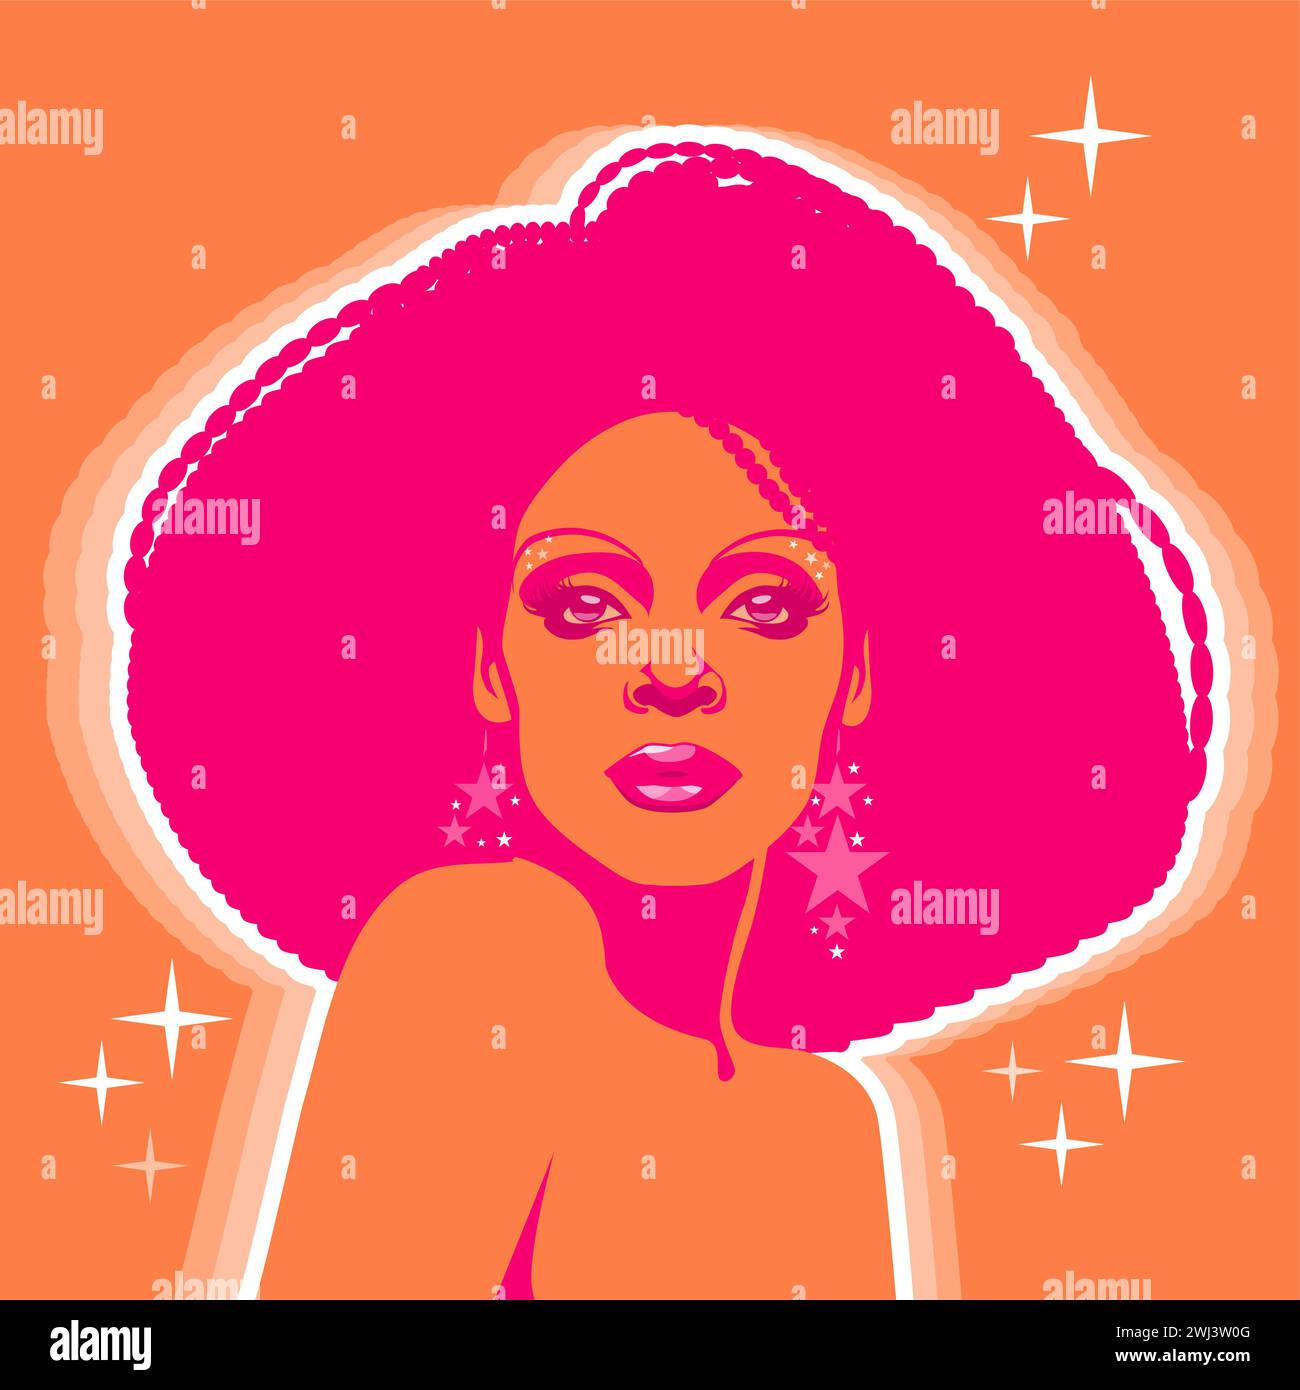 Beautiful woman with afro style curly hair, acid and psychedelic colors. Poster music soul, funk or disco style 60s or 70s Stock Vector